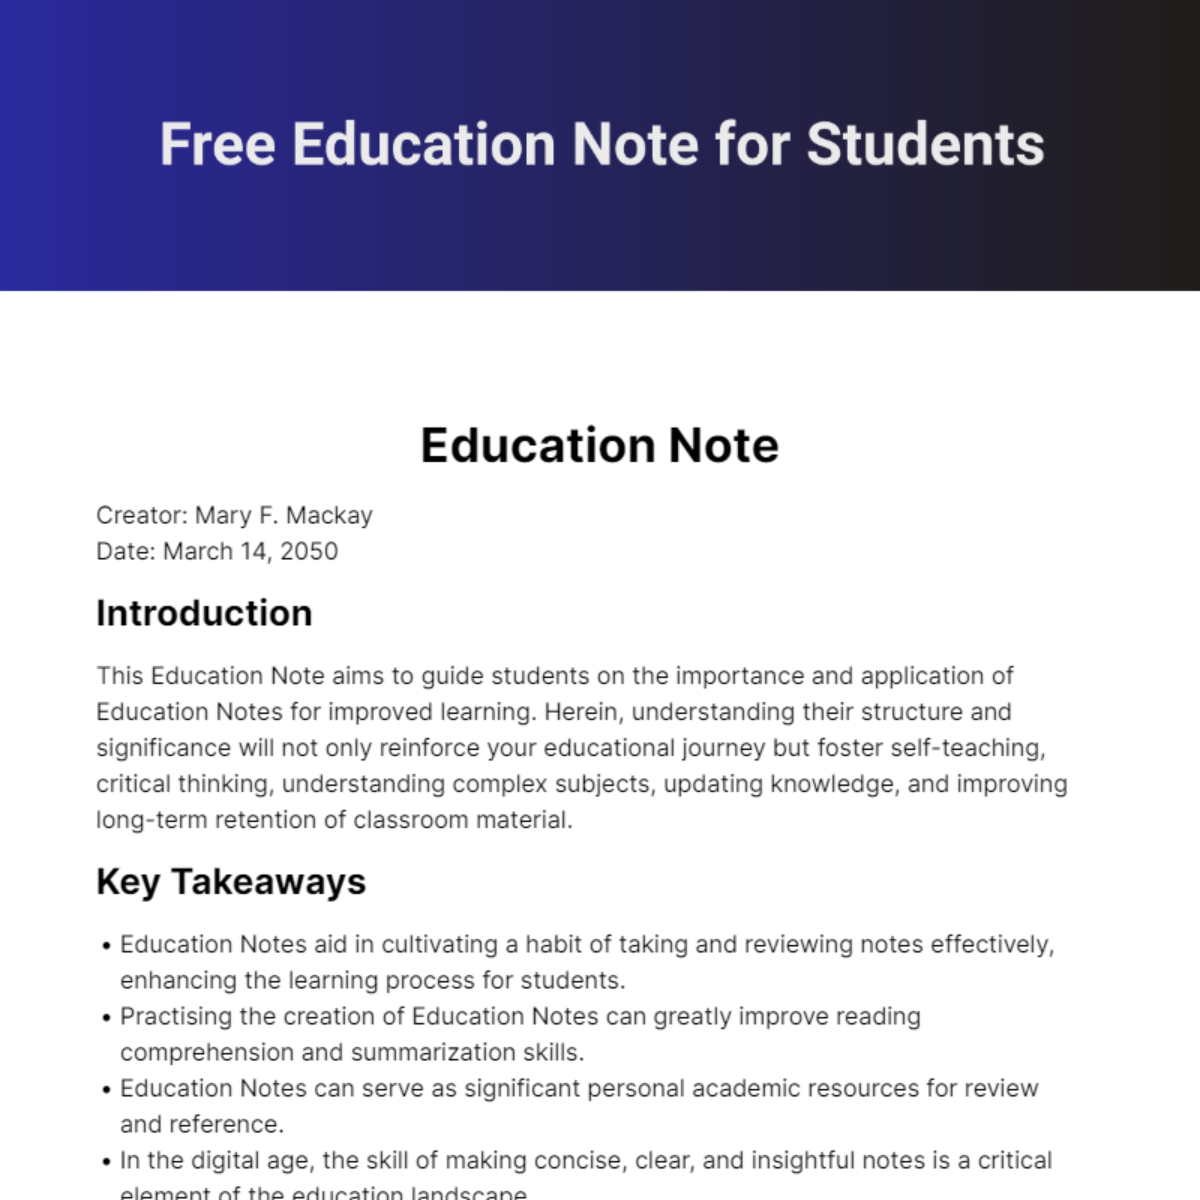 Free Education Note for Students Template